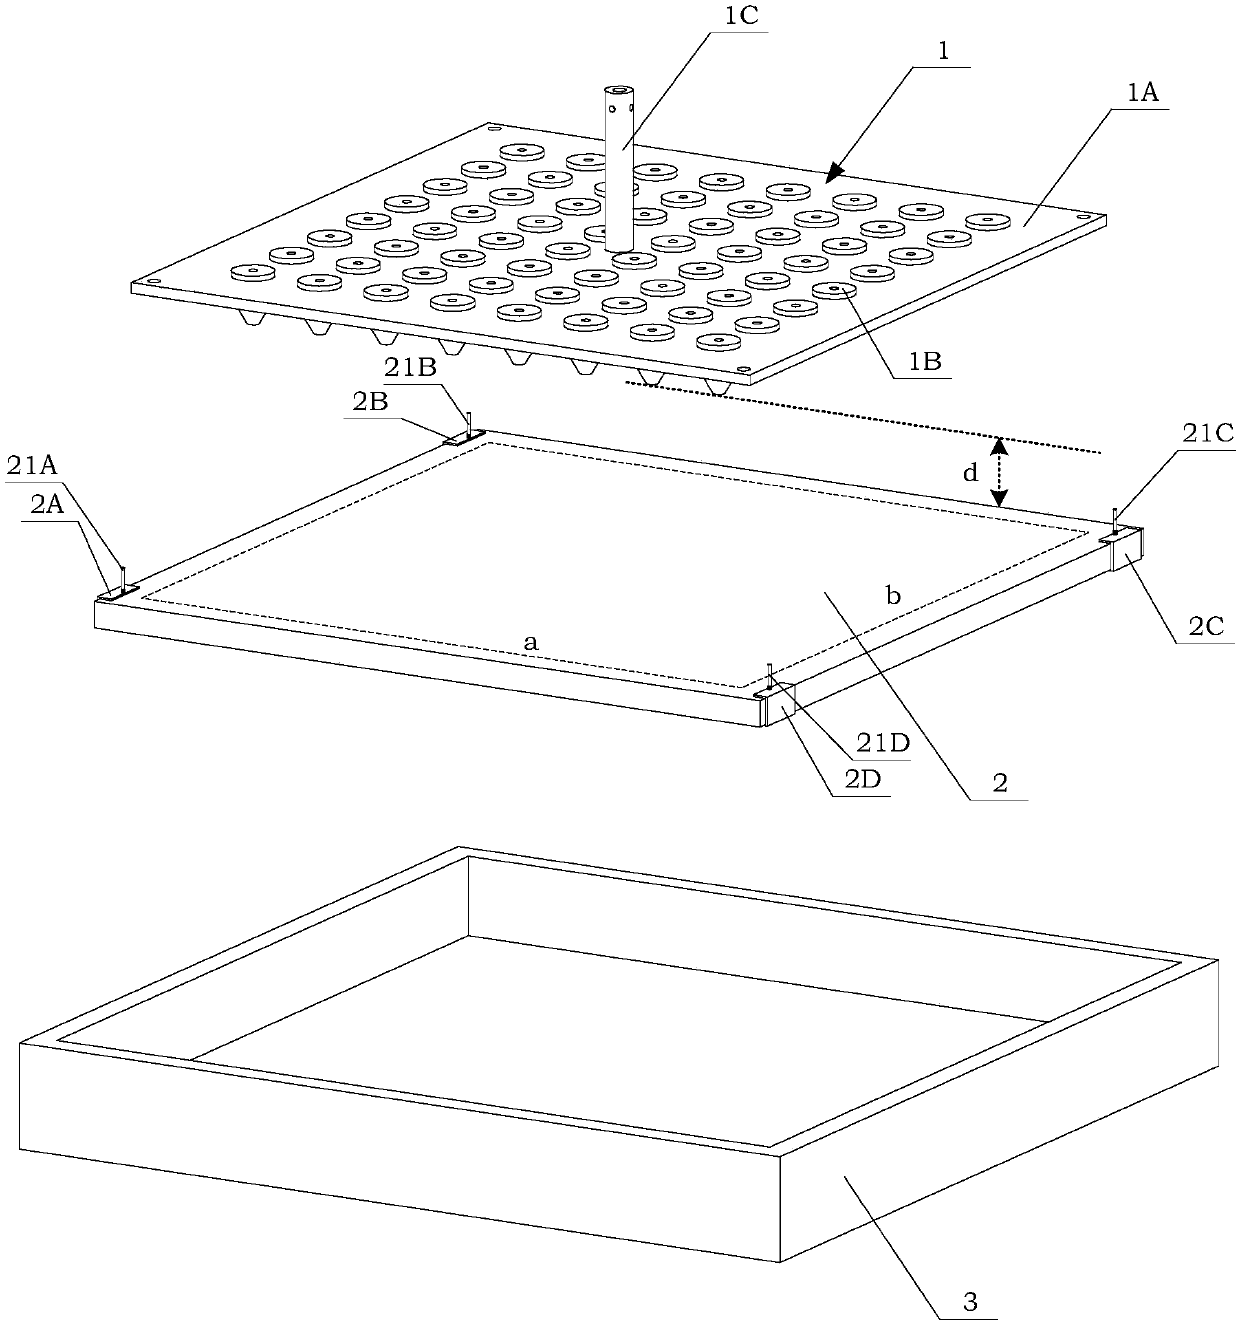 Spray preparation method of industrialized and anti-stripping largesuper-hydrophobic surface